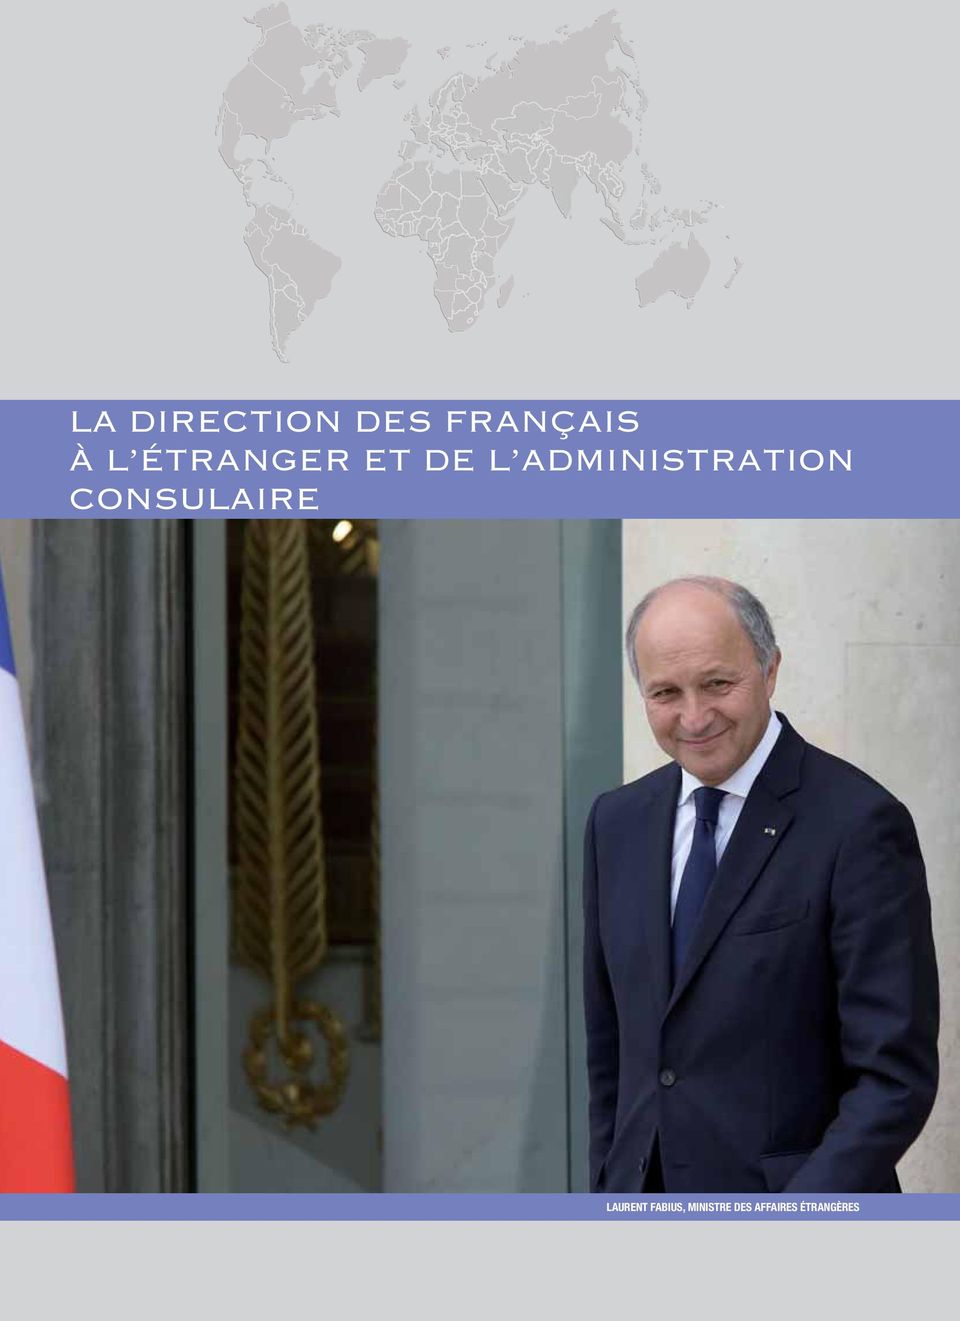 ADMINISTRATION CONSULAIRE